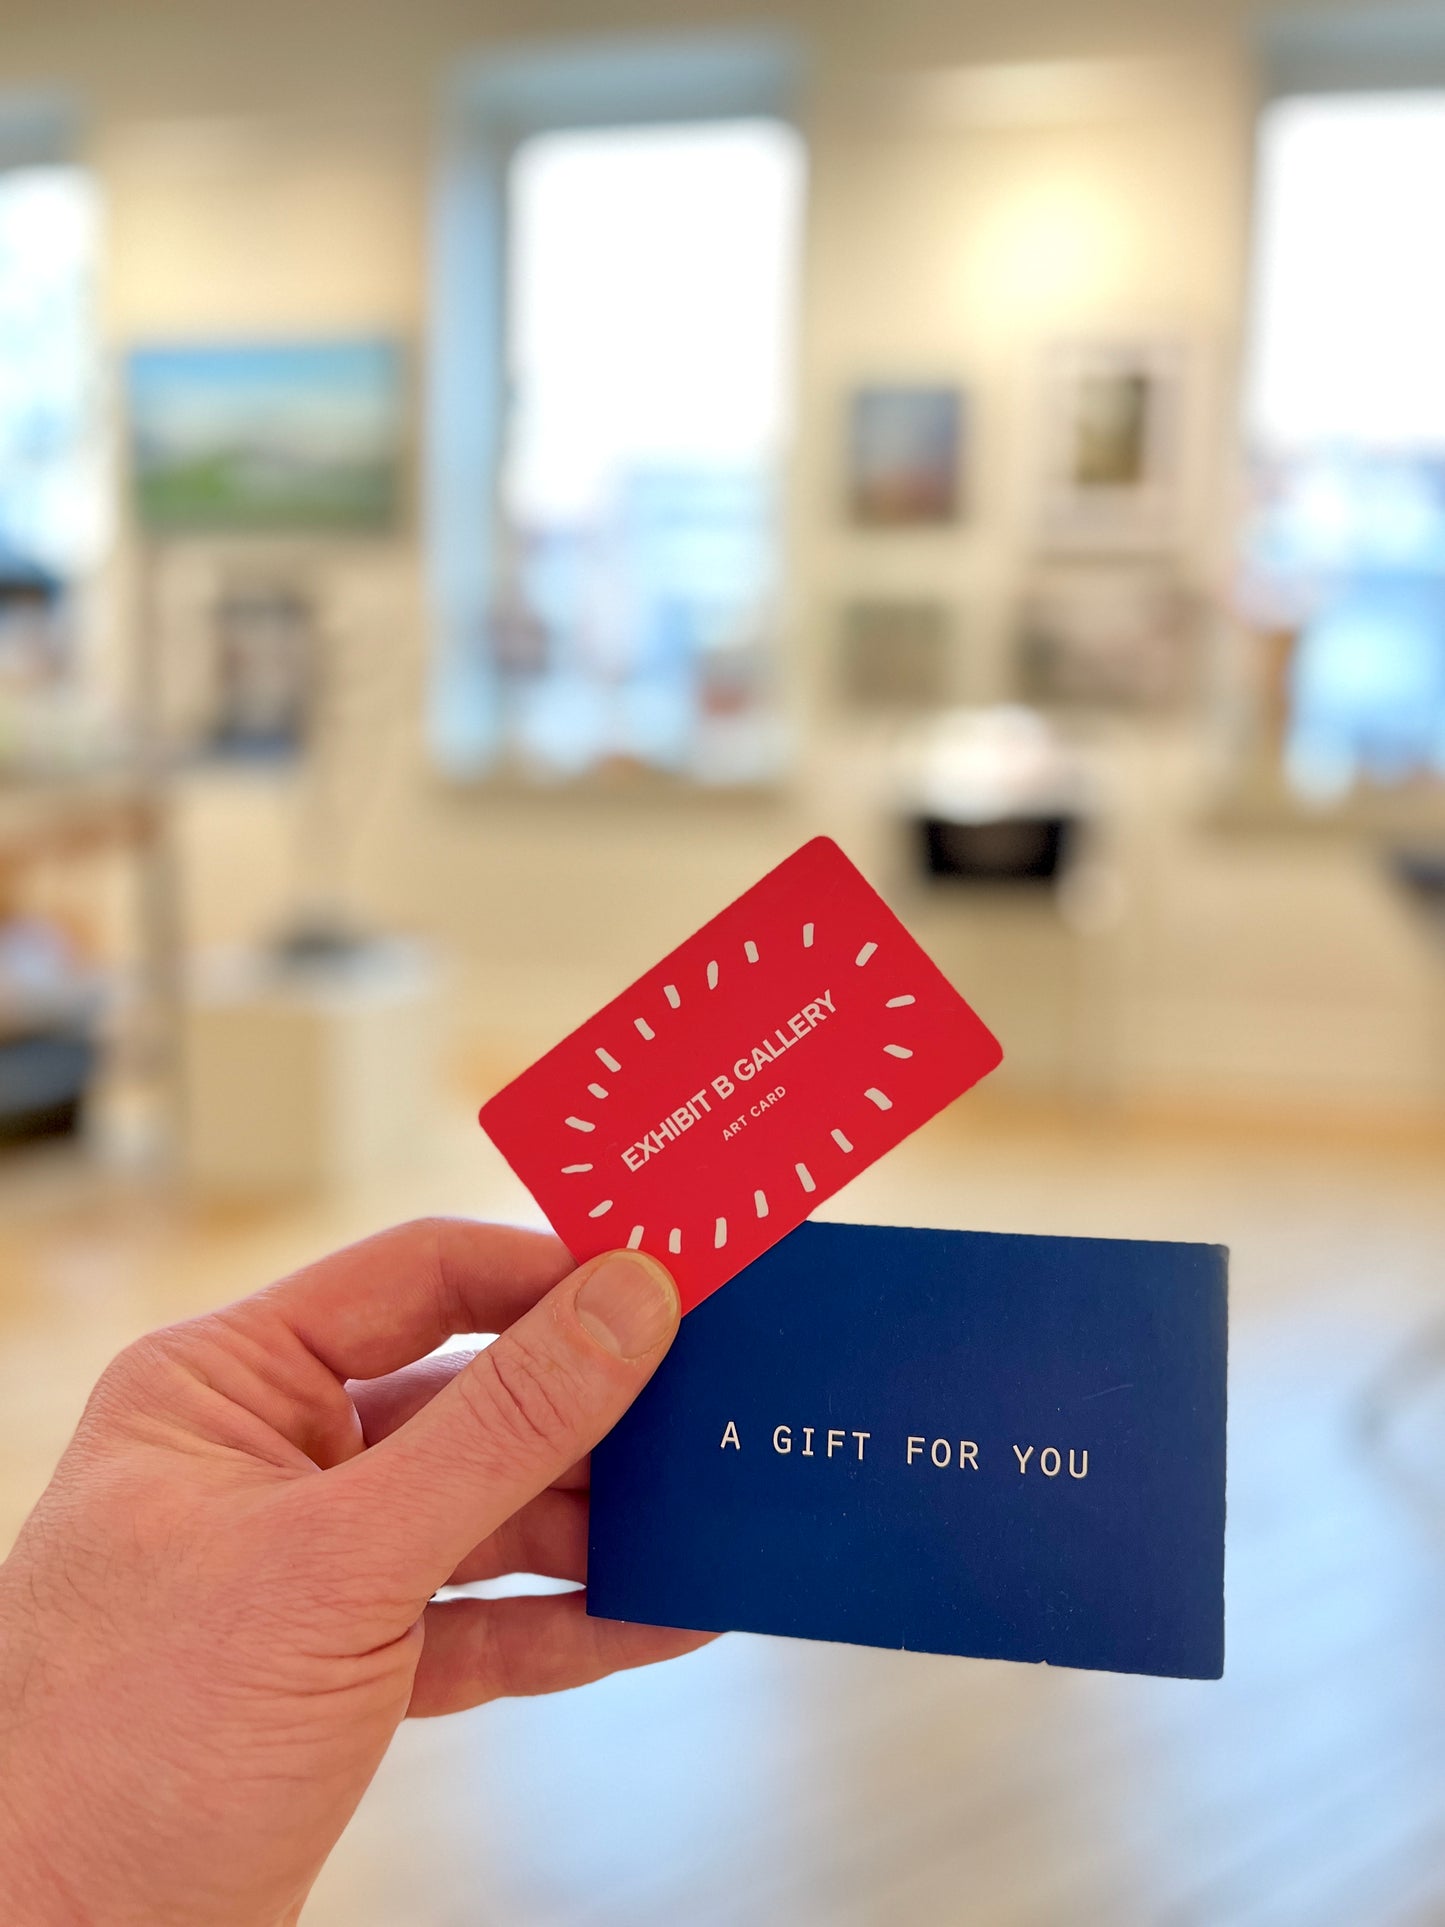 Exhibit B Gallery GIFT CARDS :)